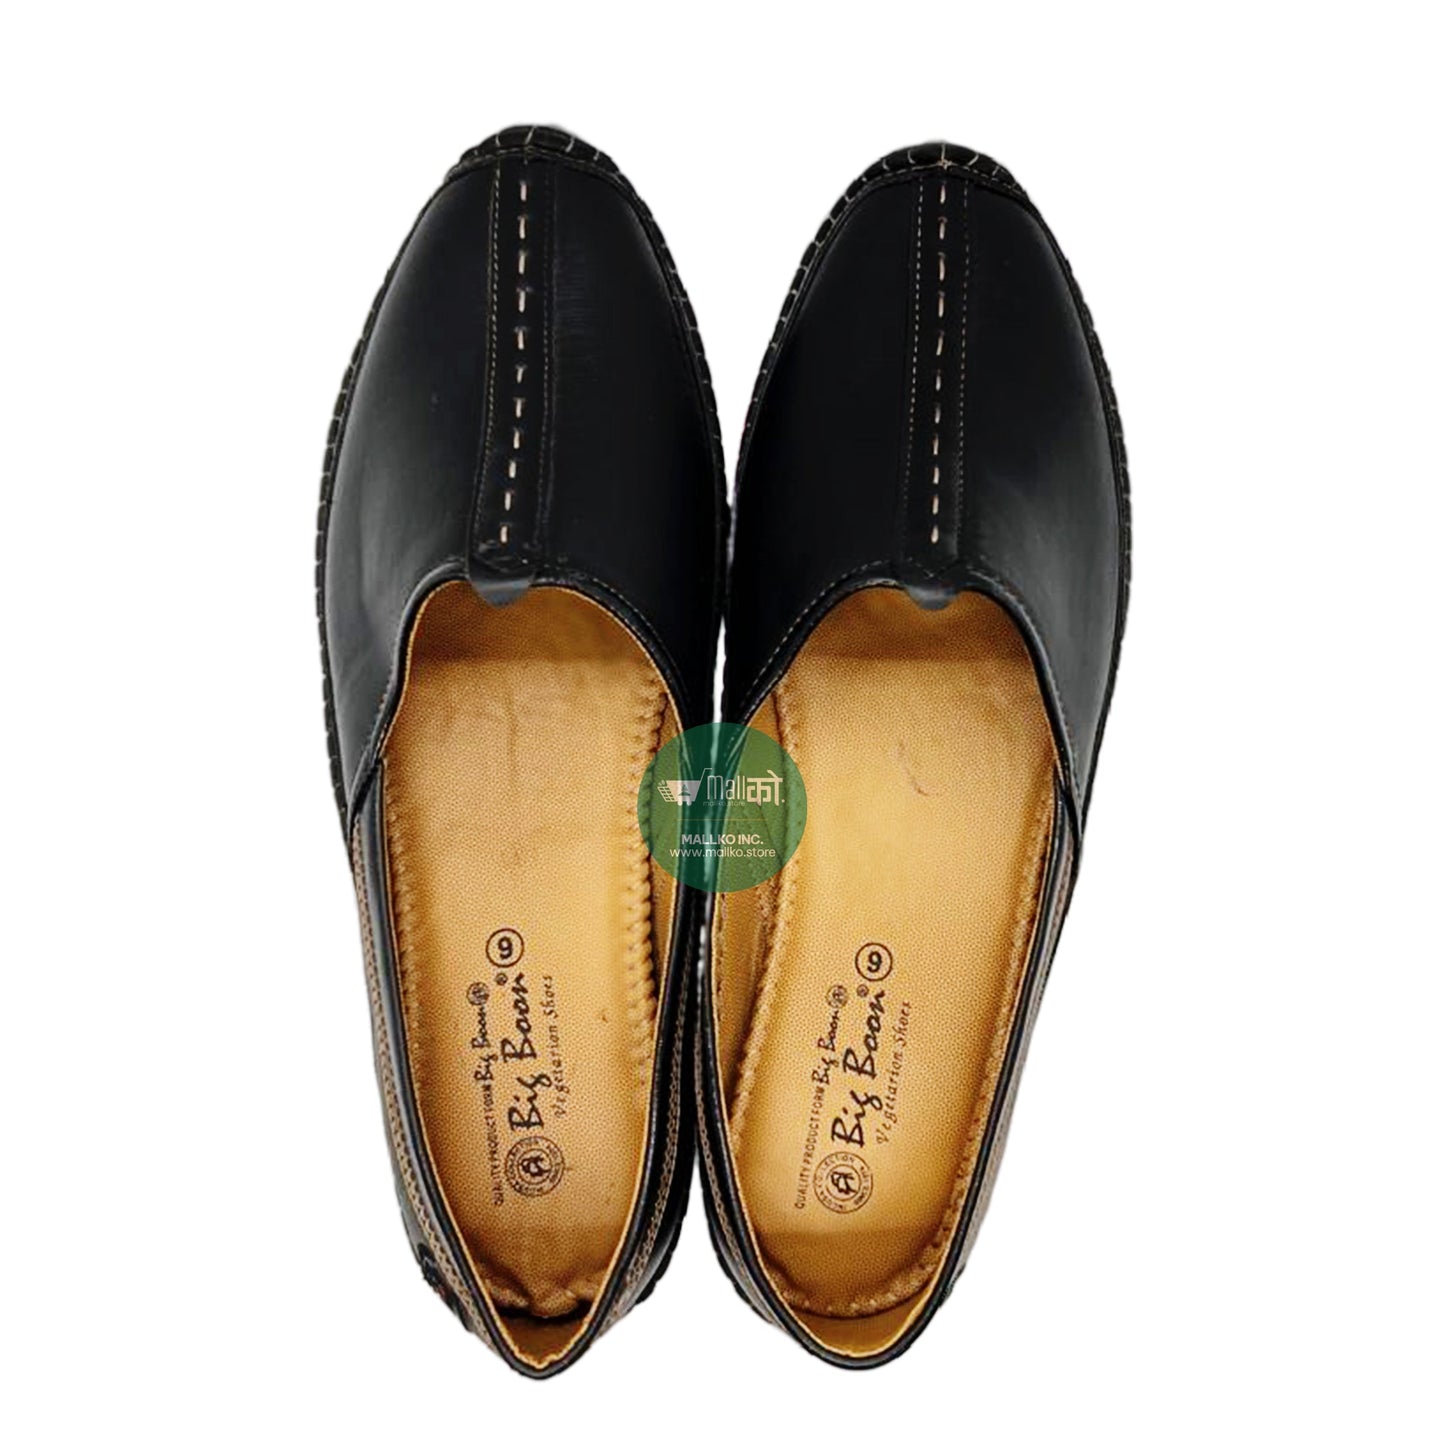 Men's Leather Loafers (Black)